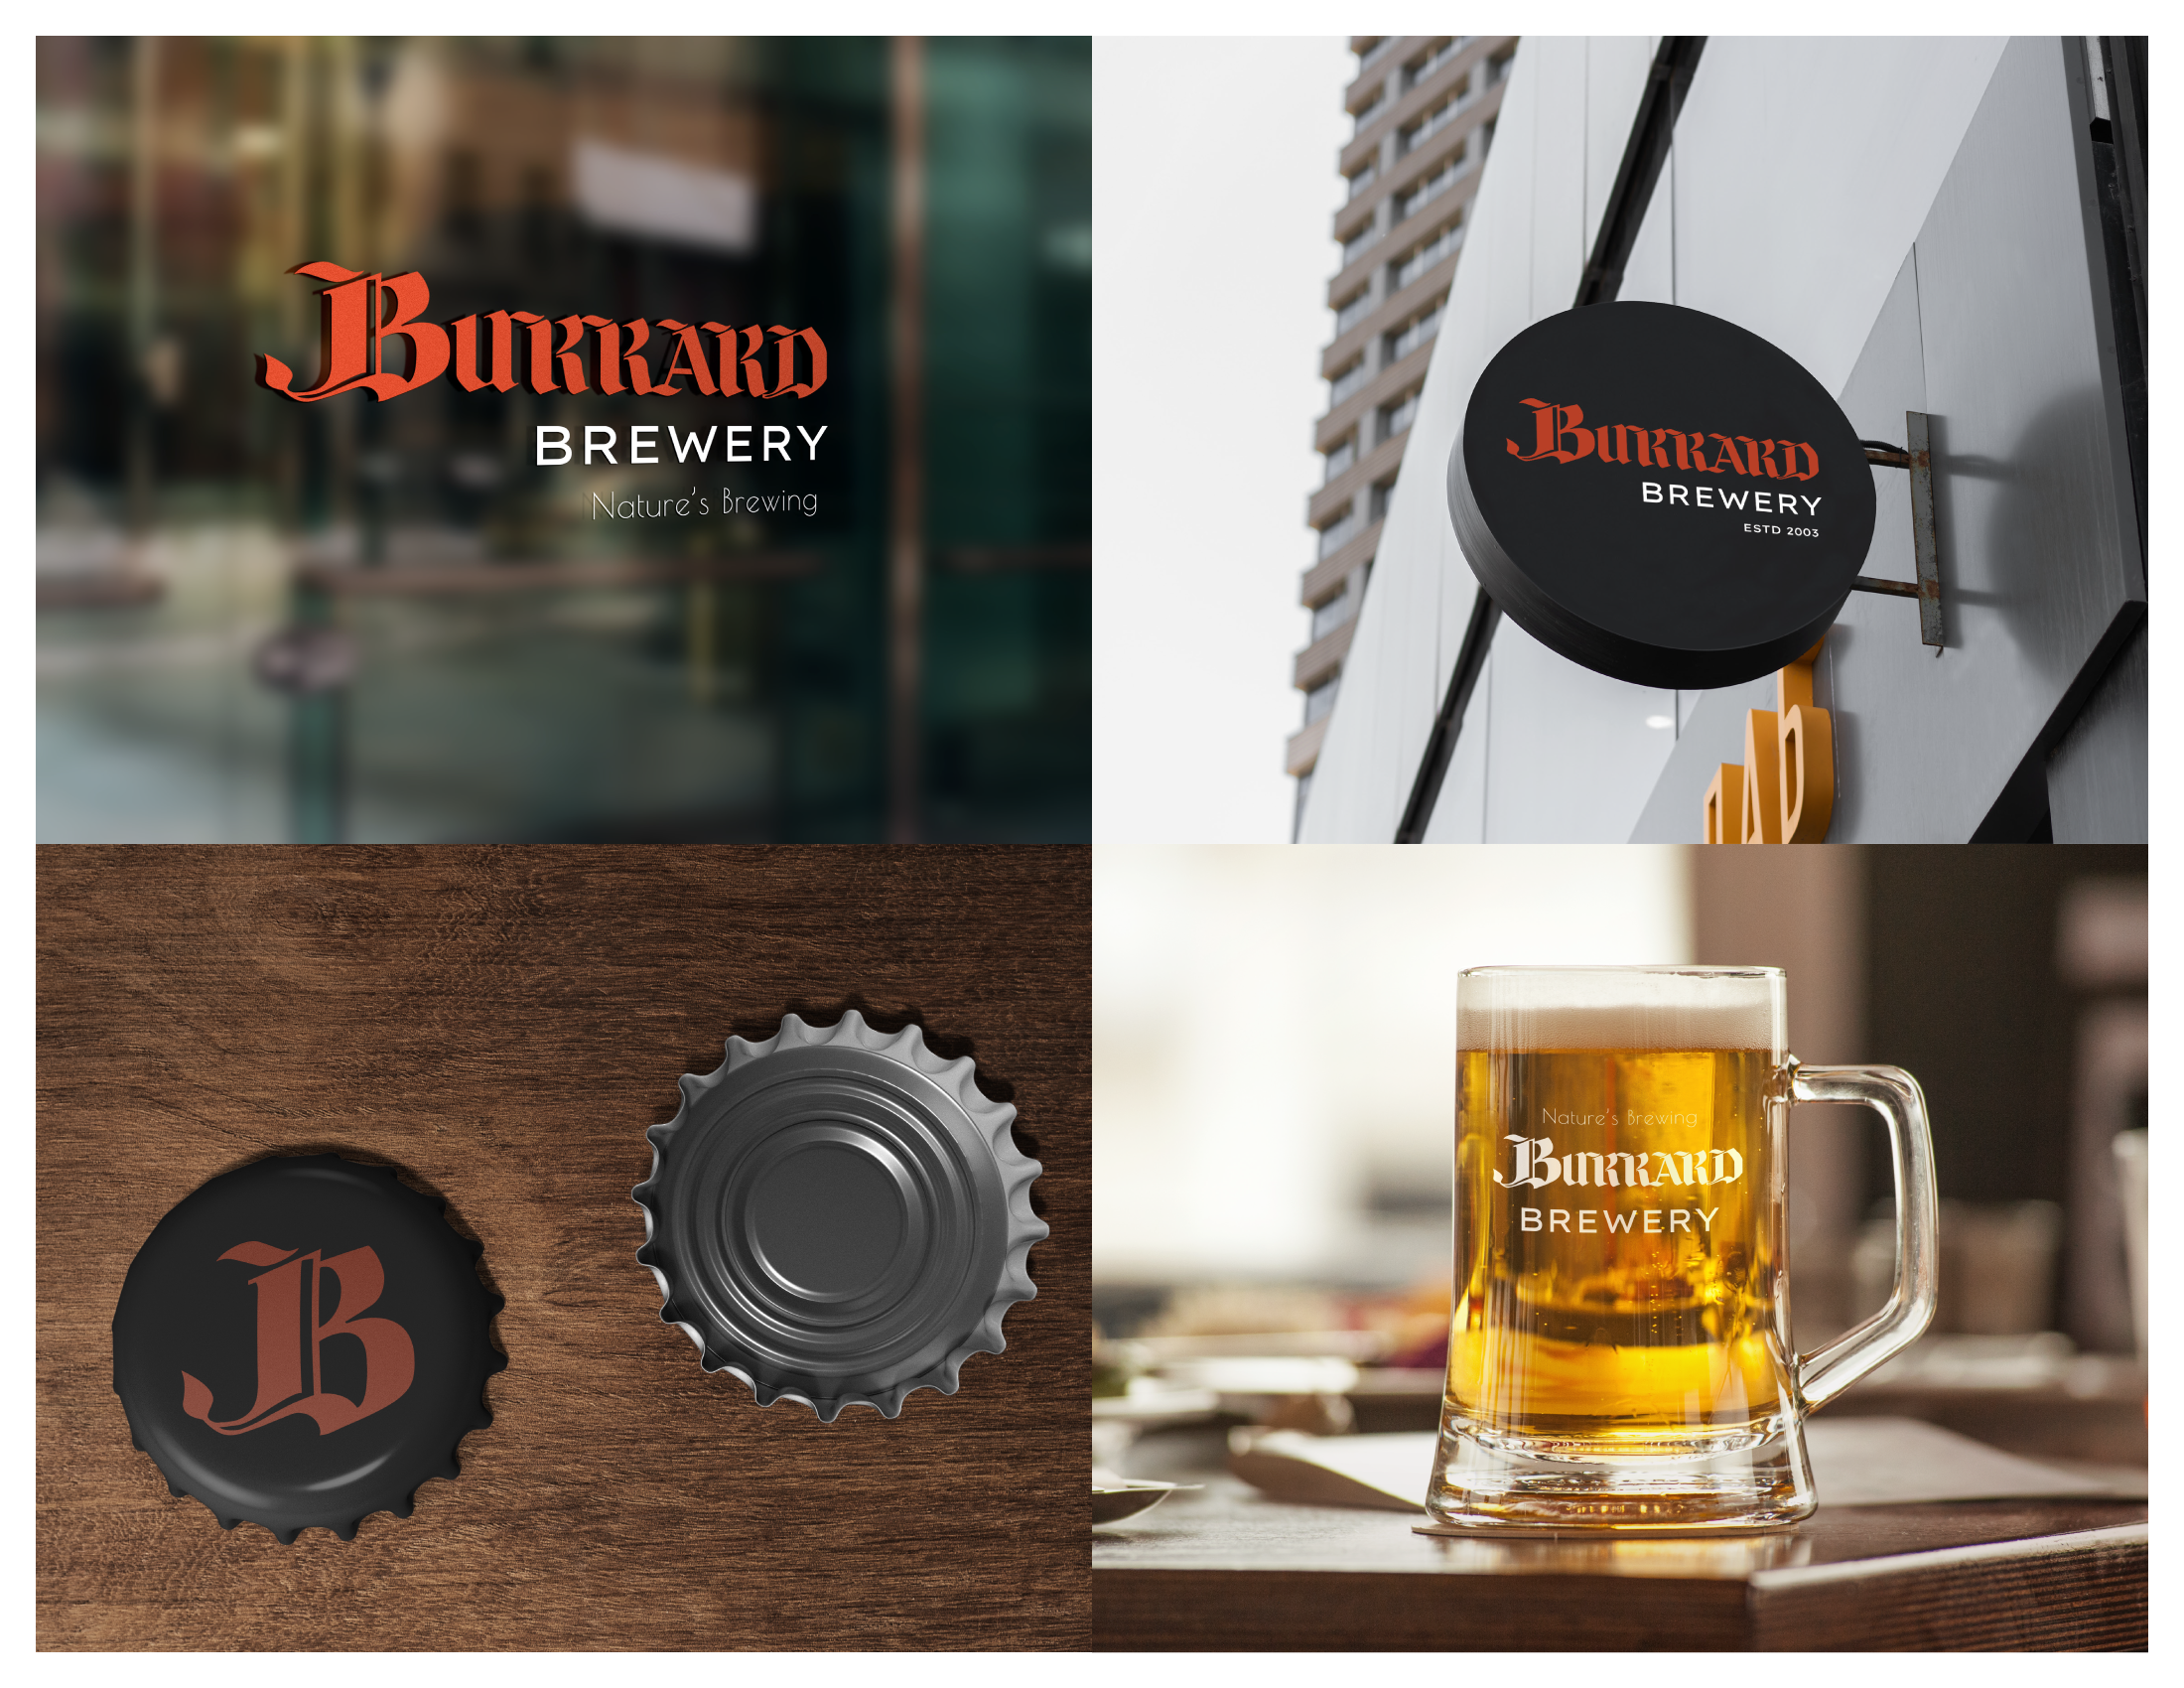 Burrard Brewery Product Design - Image 3